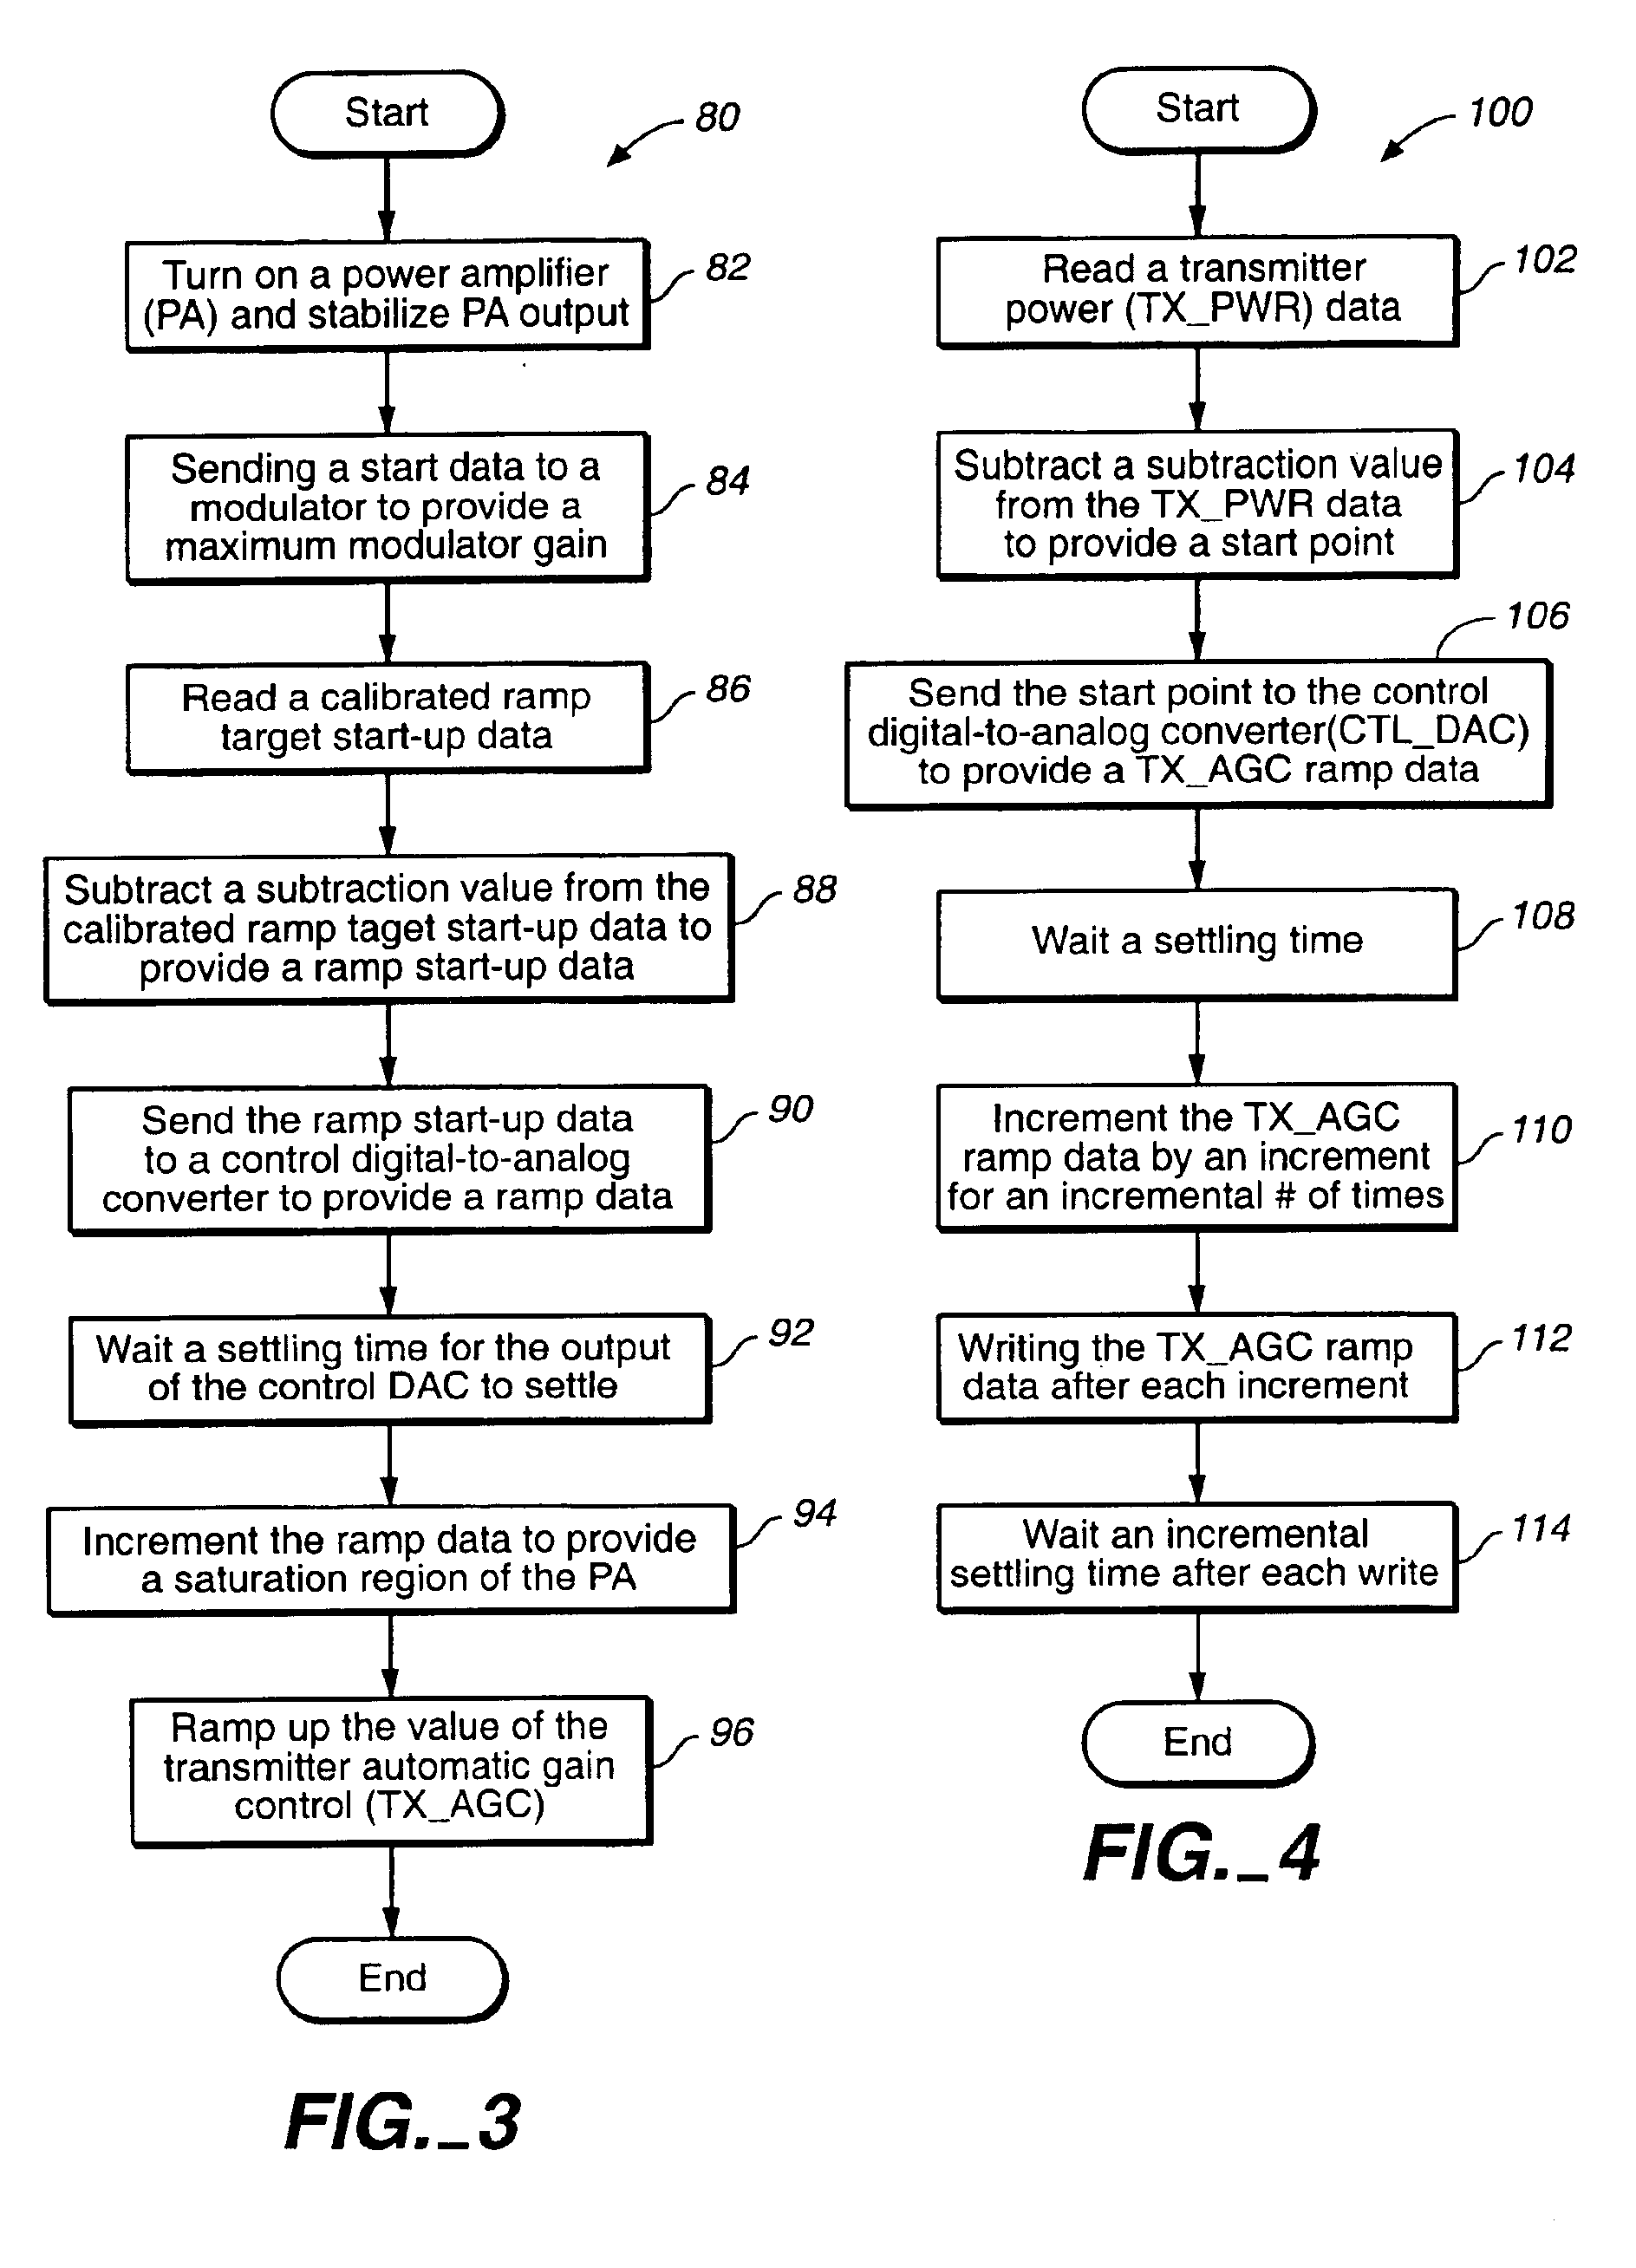 Apparatus and method for power ramp up of wireless modem transmitter